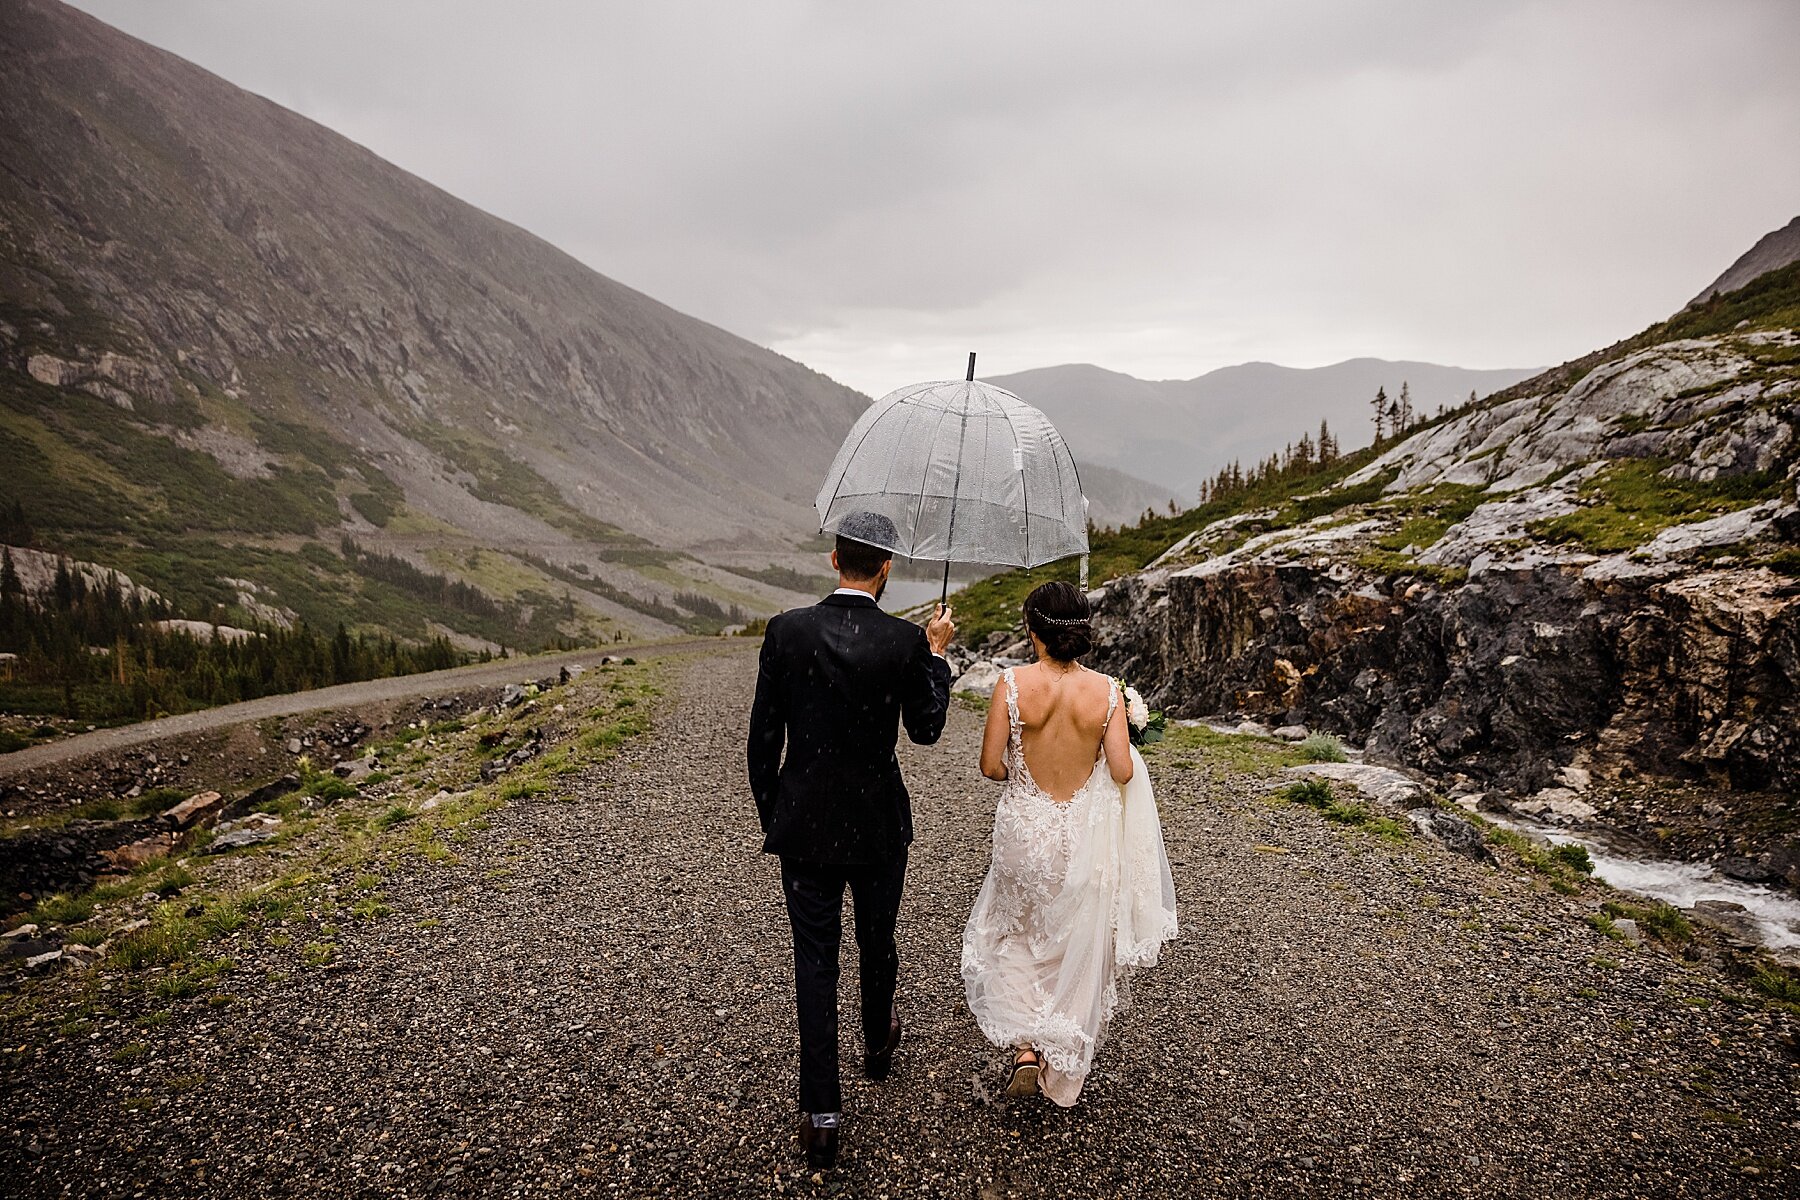 Rainy Mountaintop Elopement in Colorado - Vow of the Wild